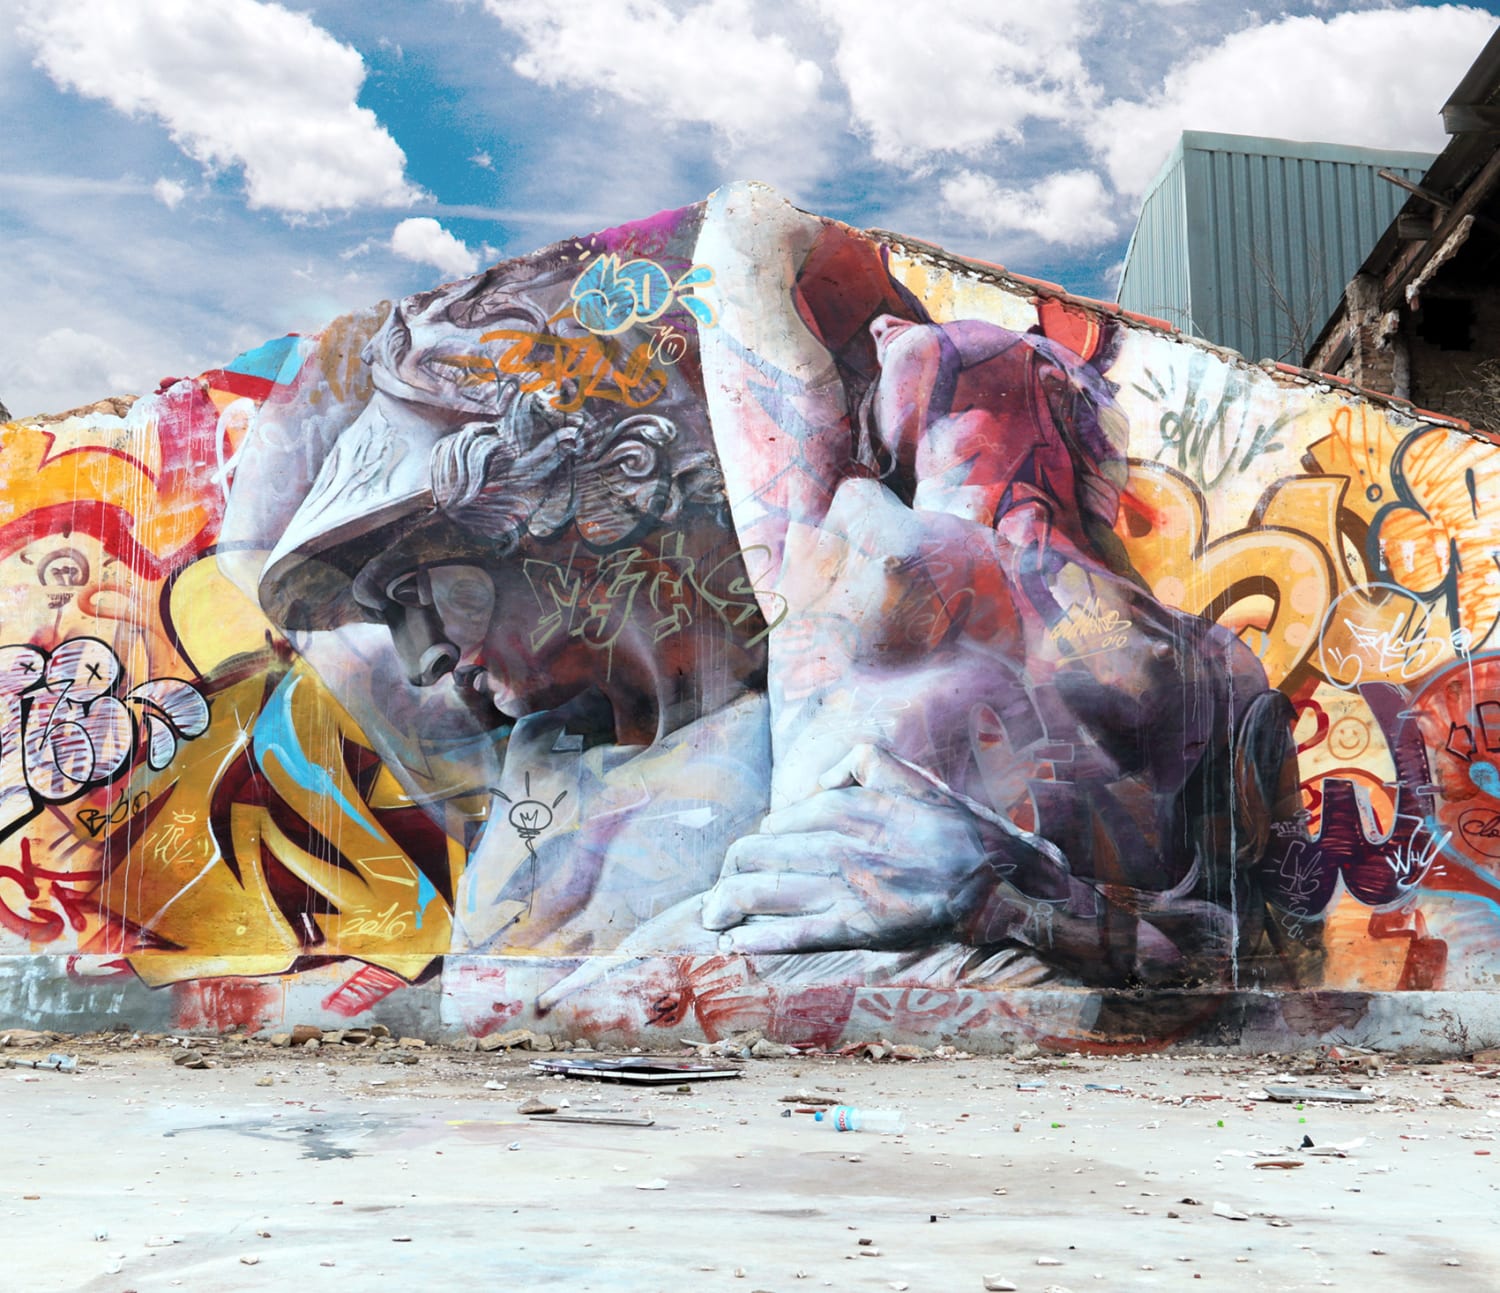 New Walls and Canvases by PichiAvo That Mix Classic Greek Imagery With Graffiti Writing — Colossal